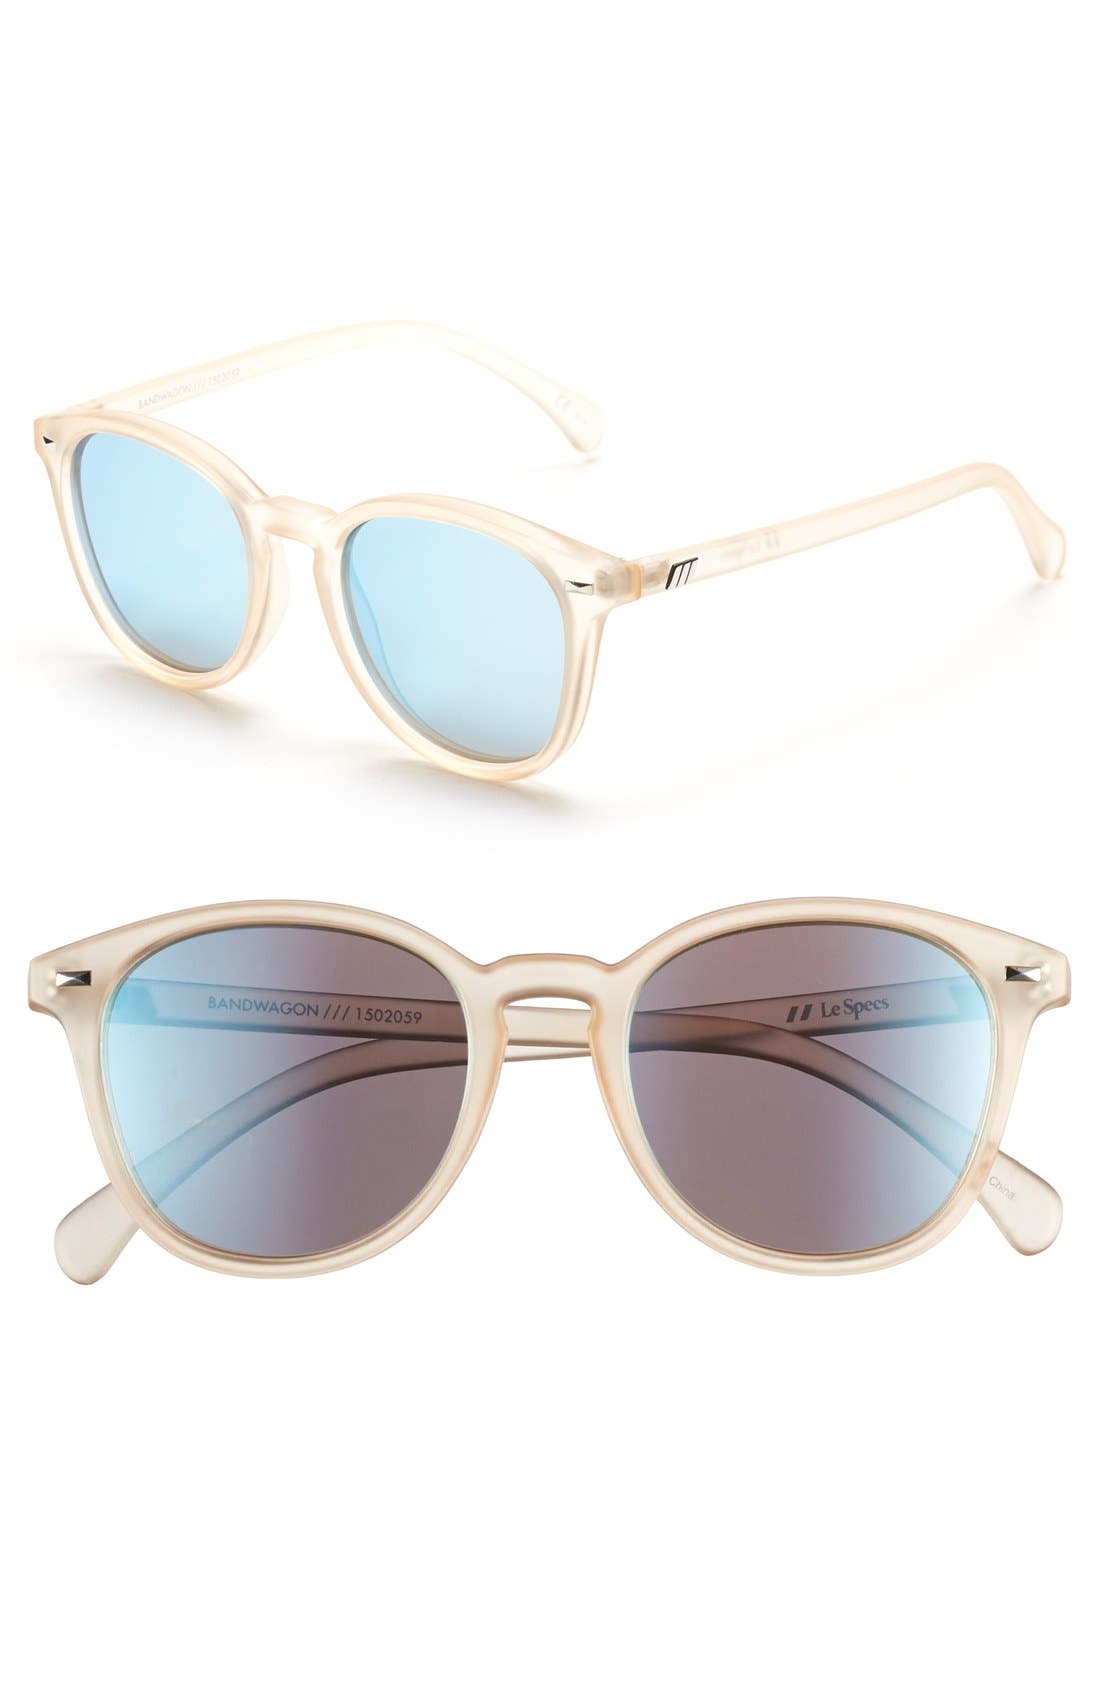 Le Specs Bandwagon 51mm Sunglasses in Raw Sugar/Ice Blue Mirror at Nordstrom